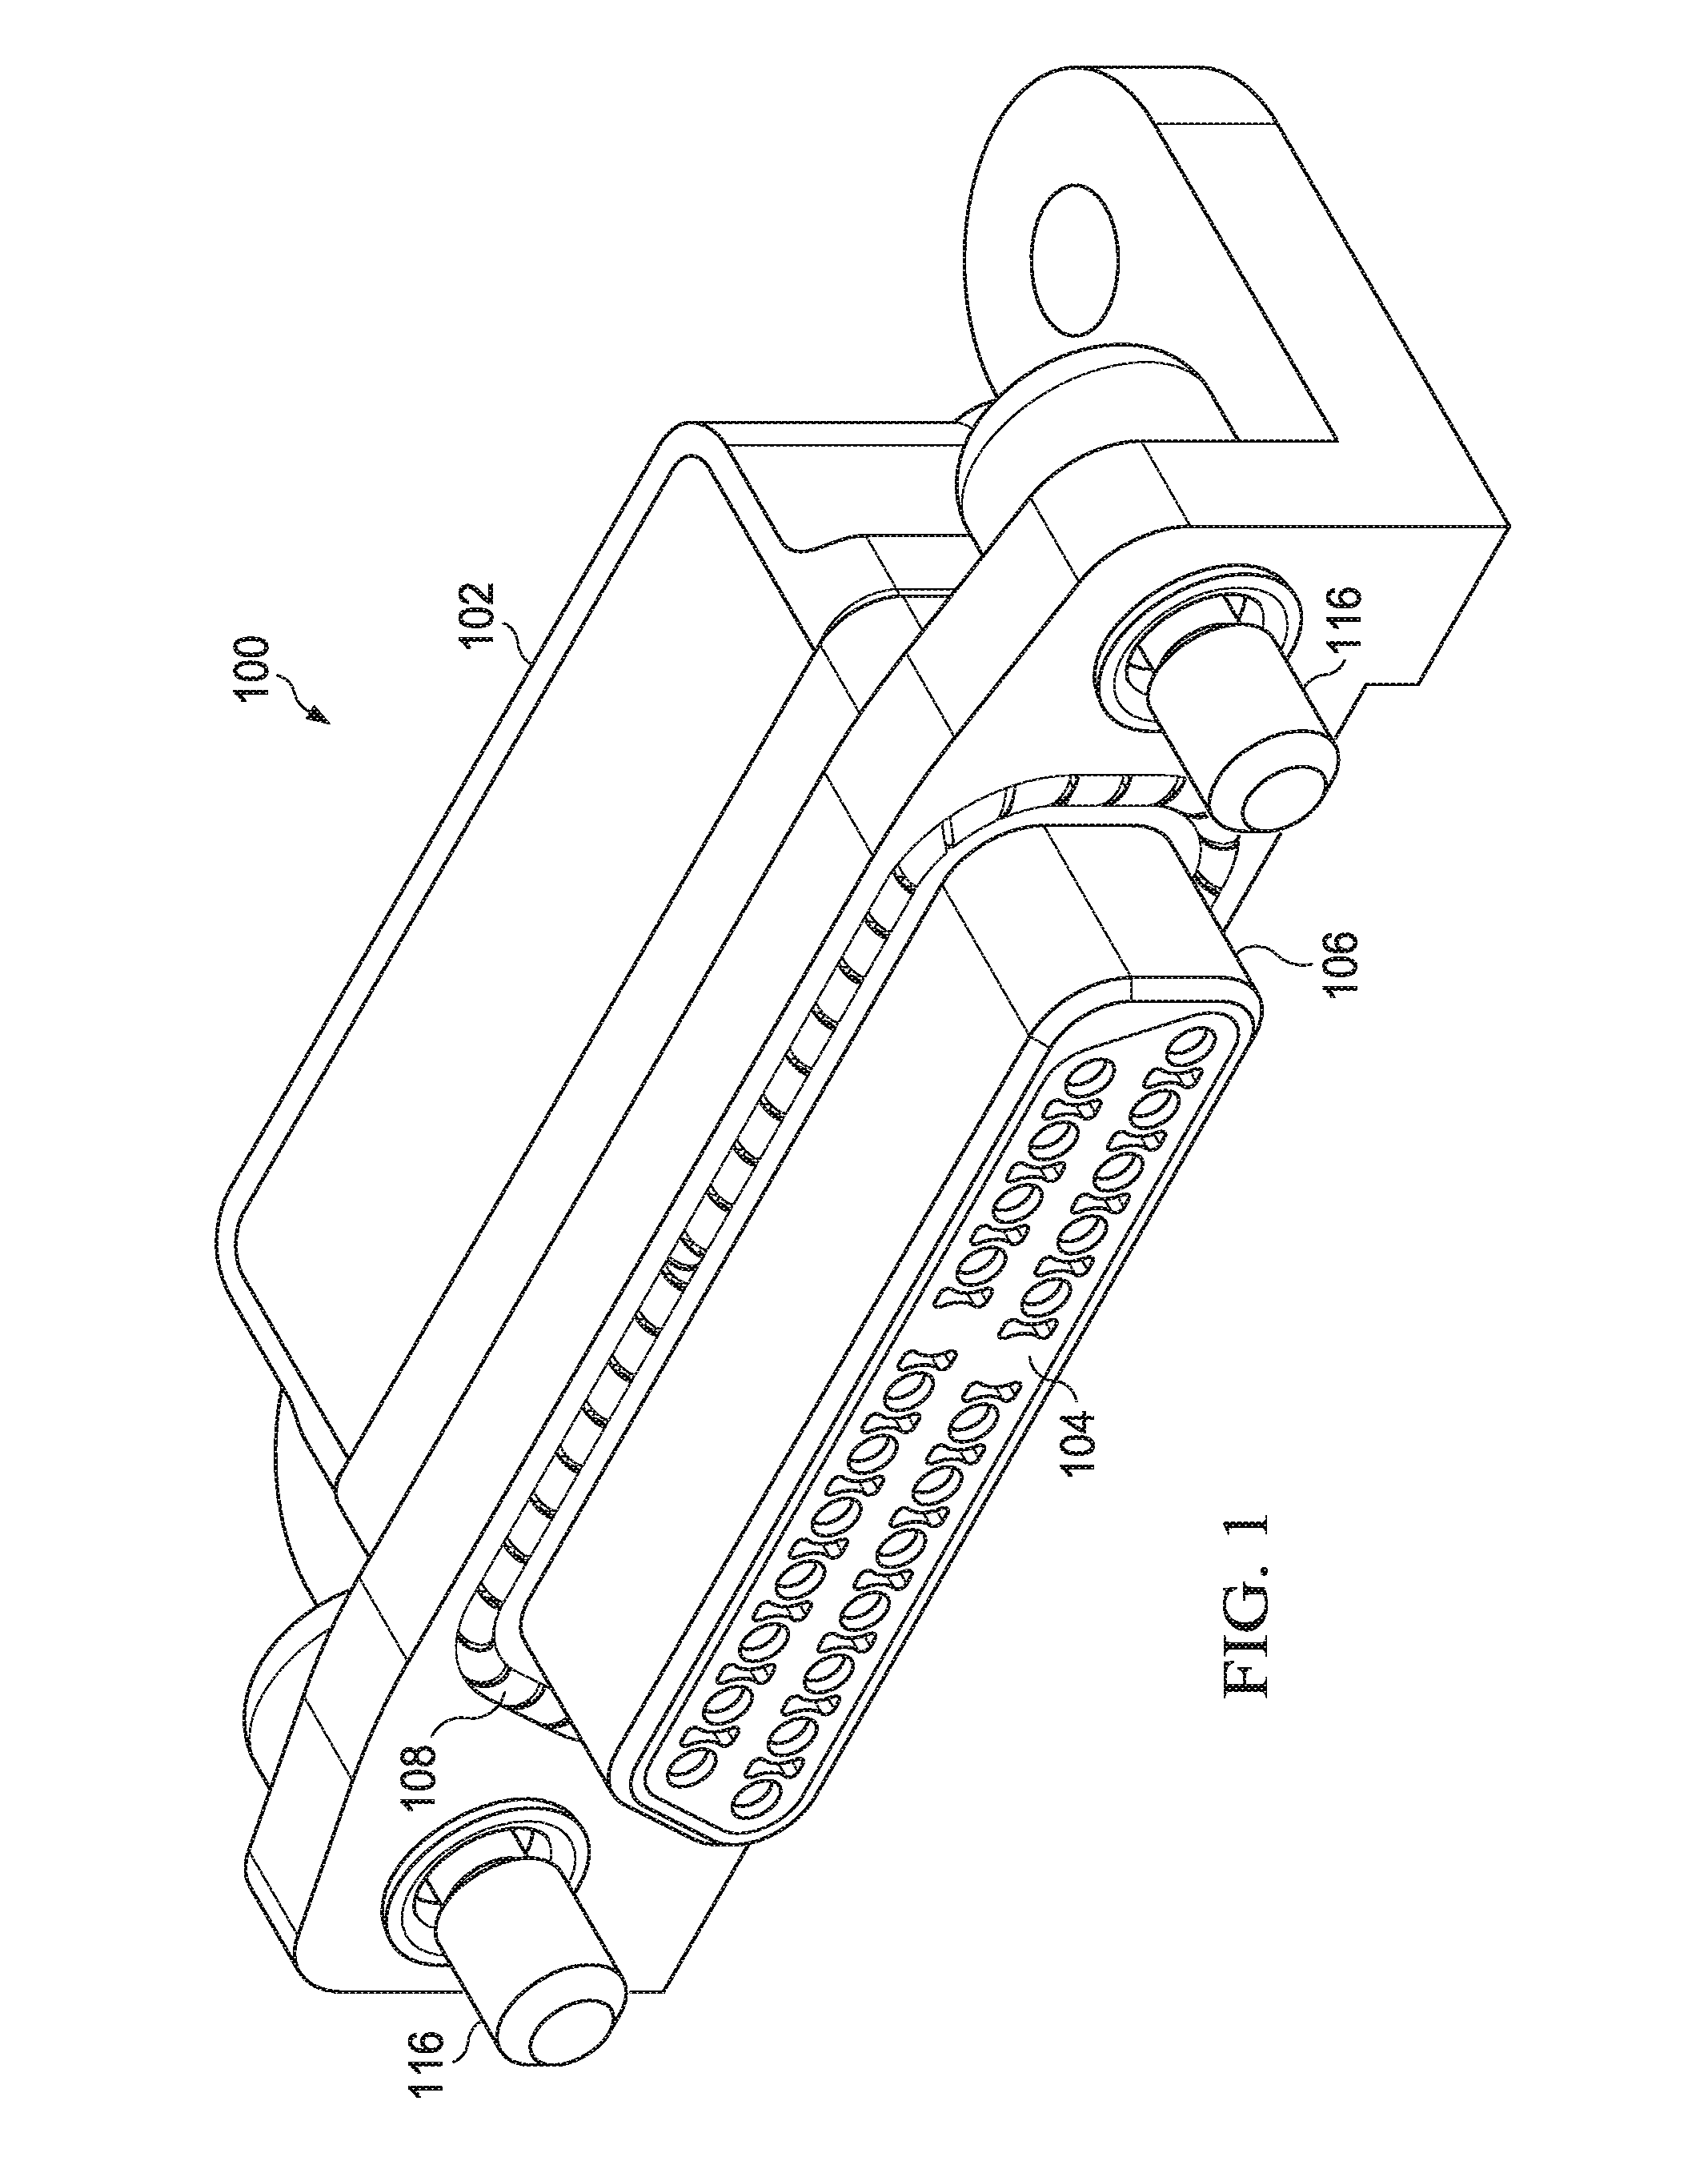 Insulator with Air Dielectric Cavities for Electrical Connector